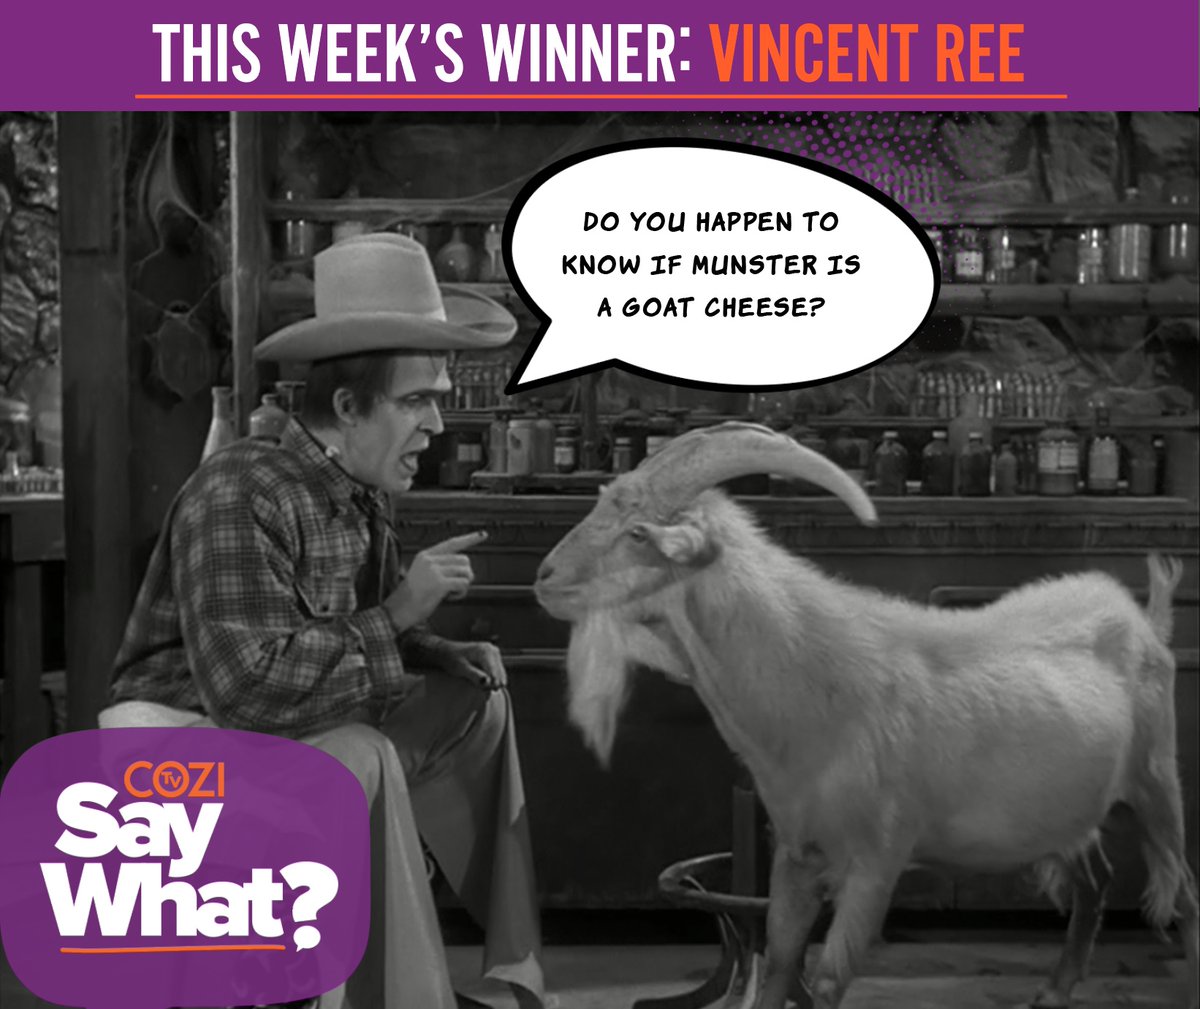 We normally don't like to get 'cheesy' but this week's #COZISayWHAT winner was pretty gouda. The Muensters! Let's give a round of applause to Vincent Ree winner of a @gomohu Leaf 50 Amplified Indoor HDTV Antenna! 👏👏👏